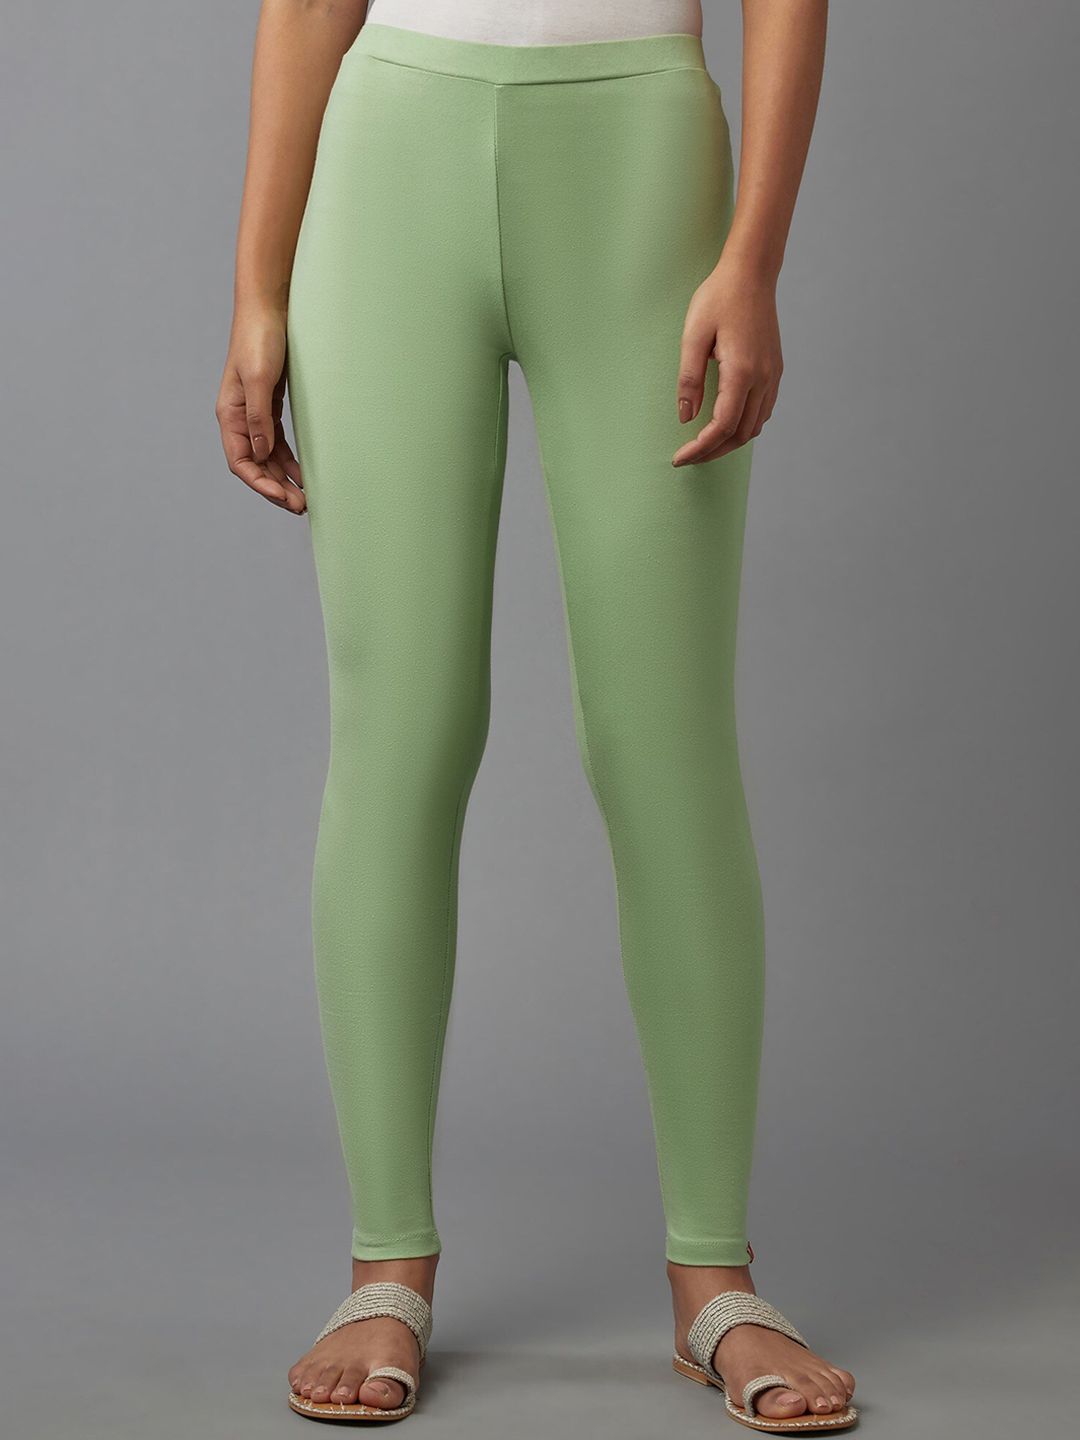 W Women Green Solid Mid Rise Ankle Length Leggings Price in India